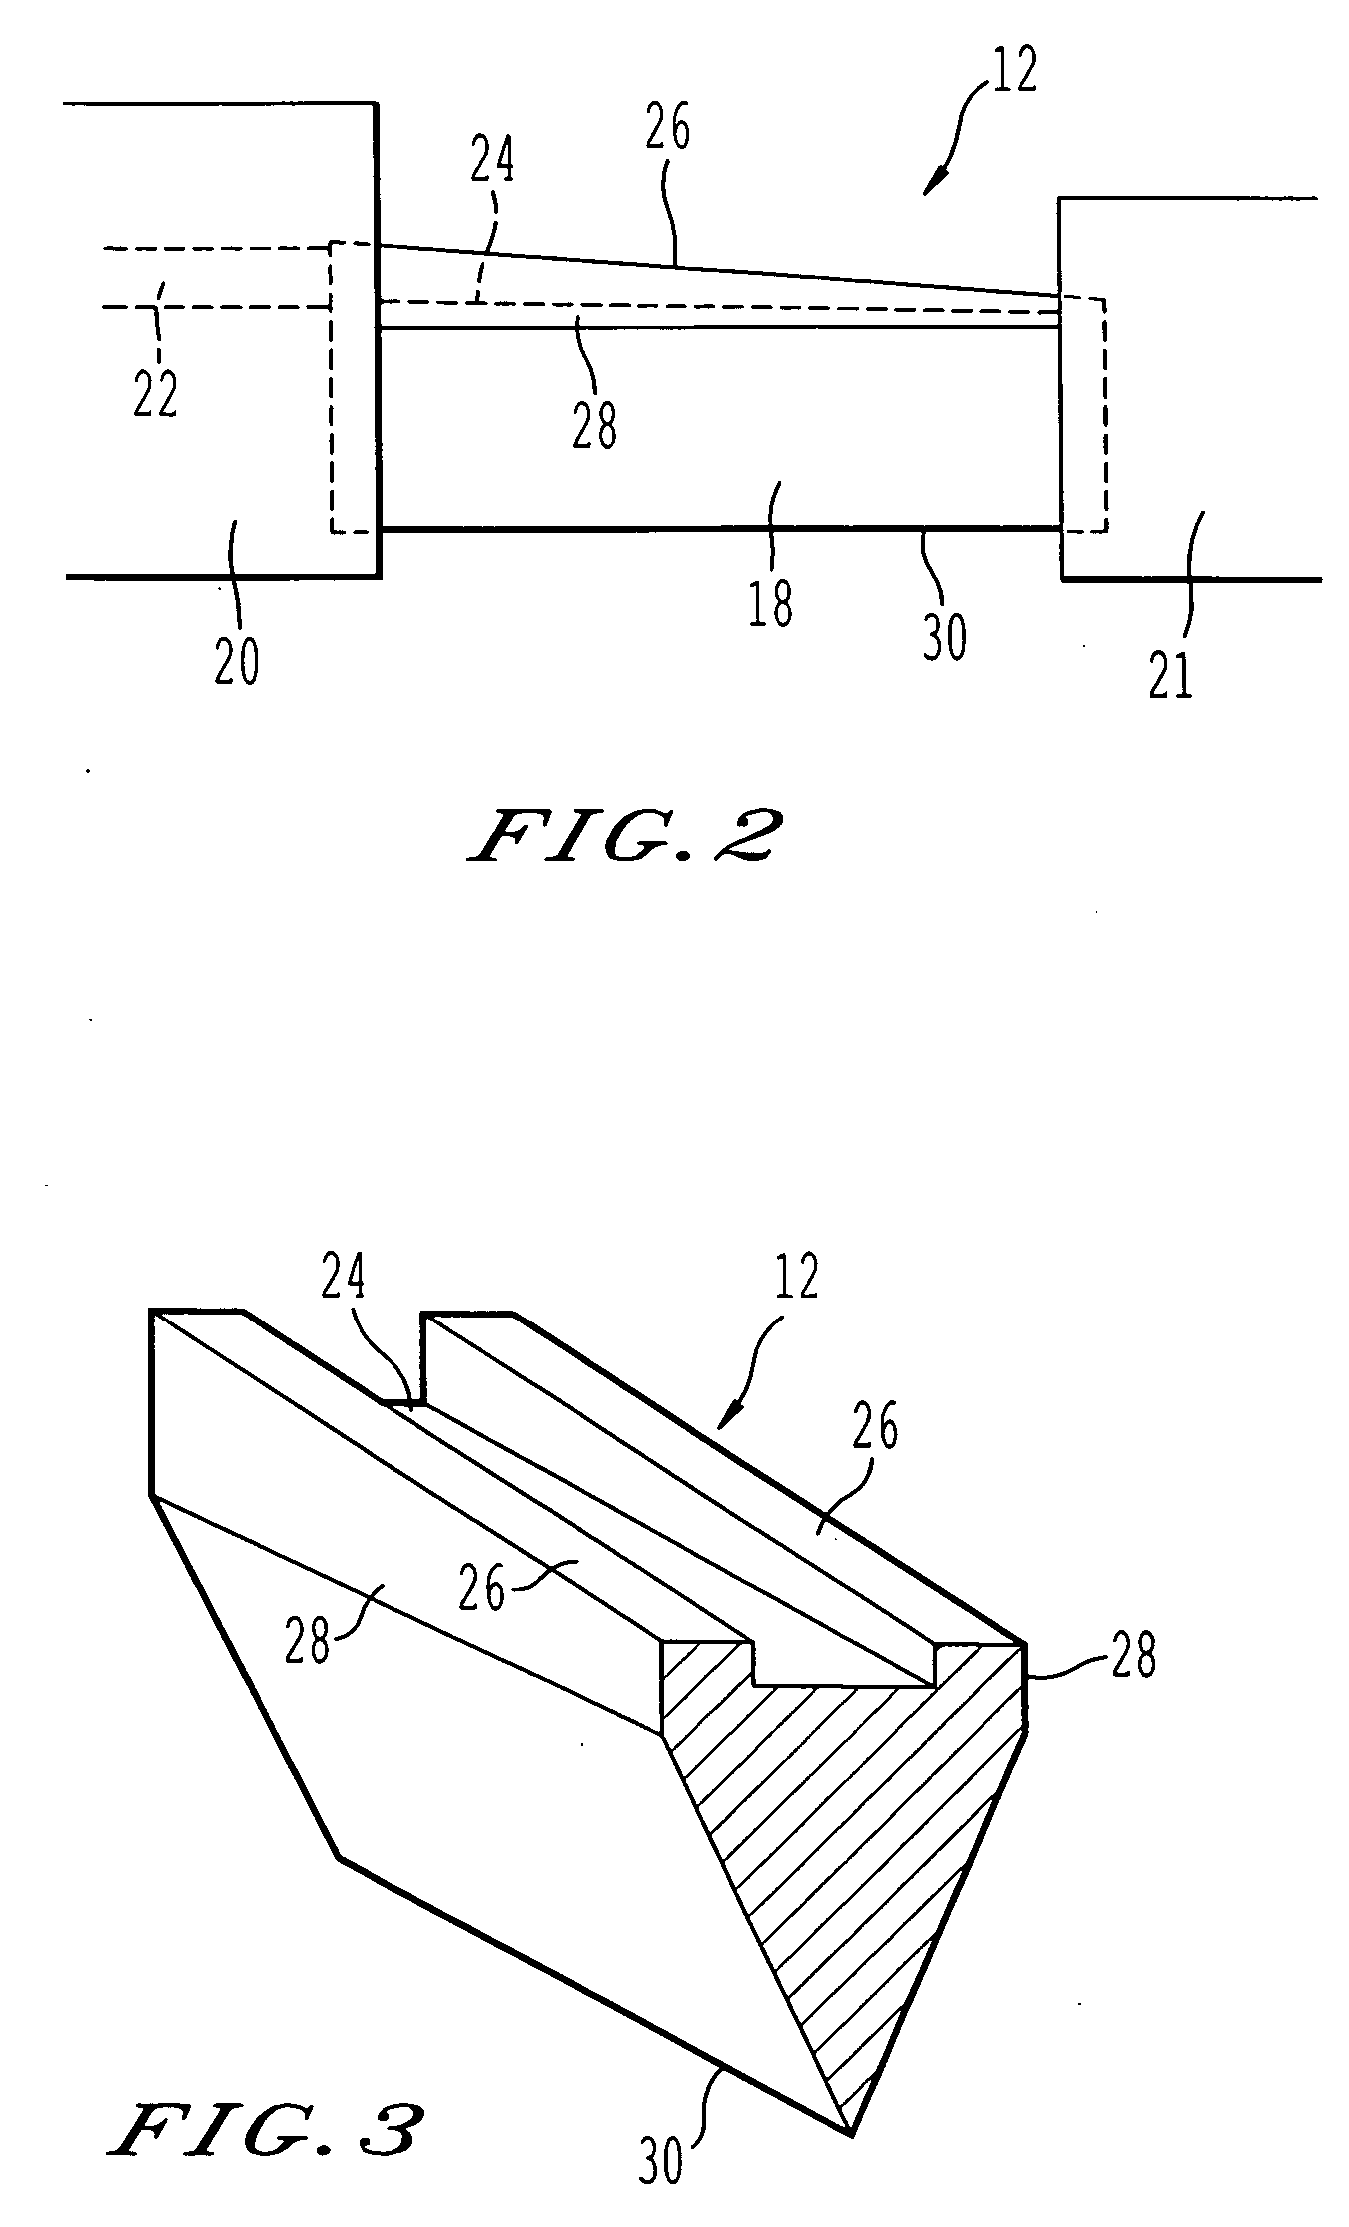 Apparatus for manufacturing sheet glass